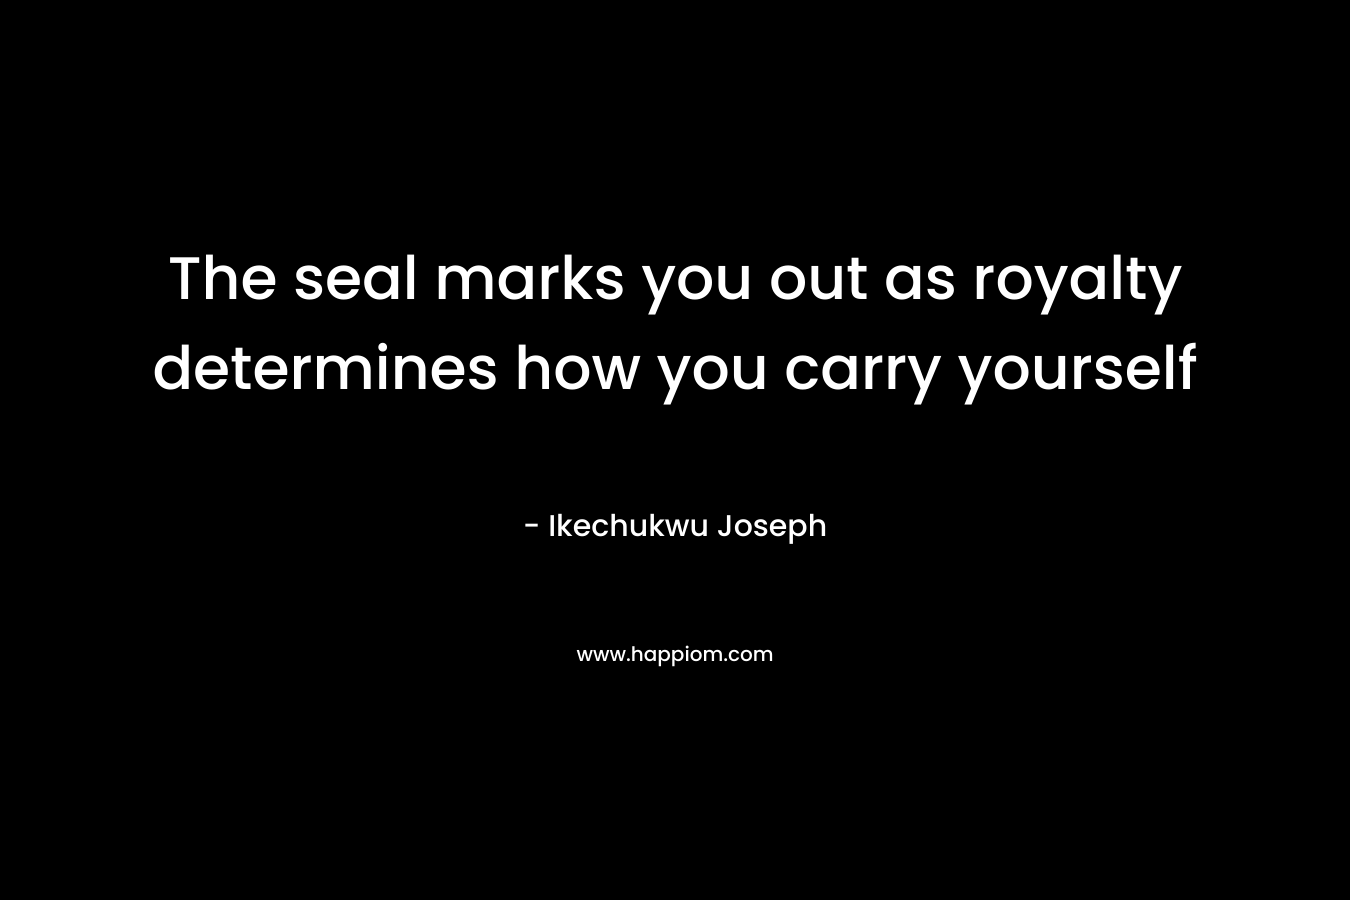 The seal marks you out as royalty determines how you carry yourself